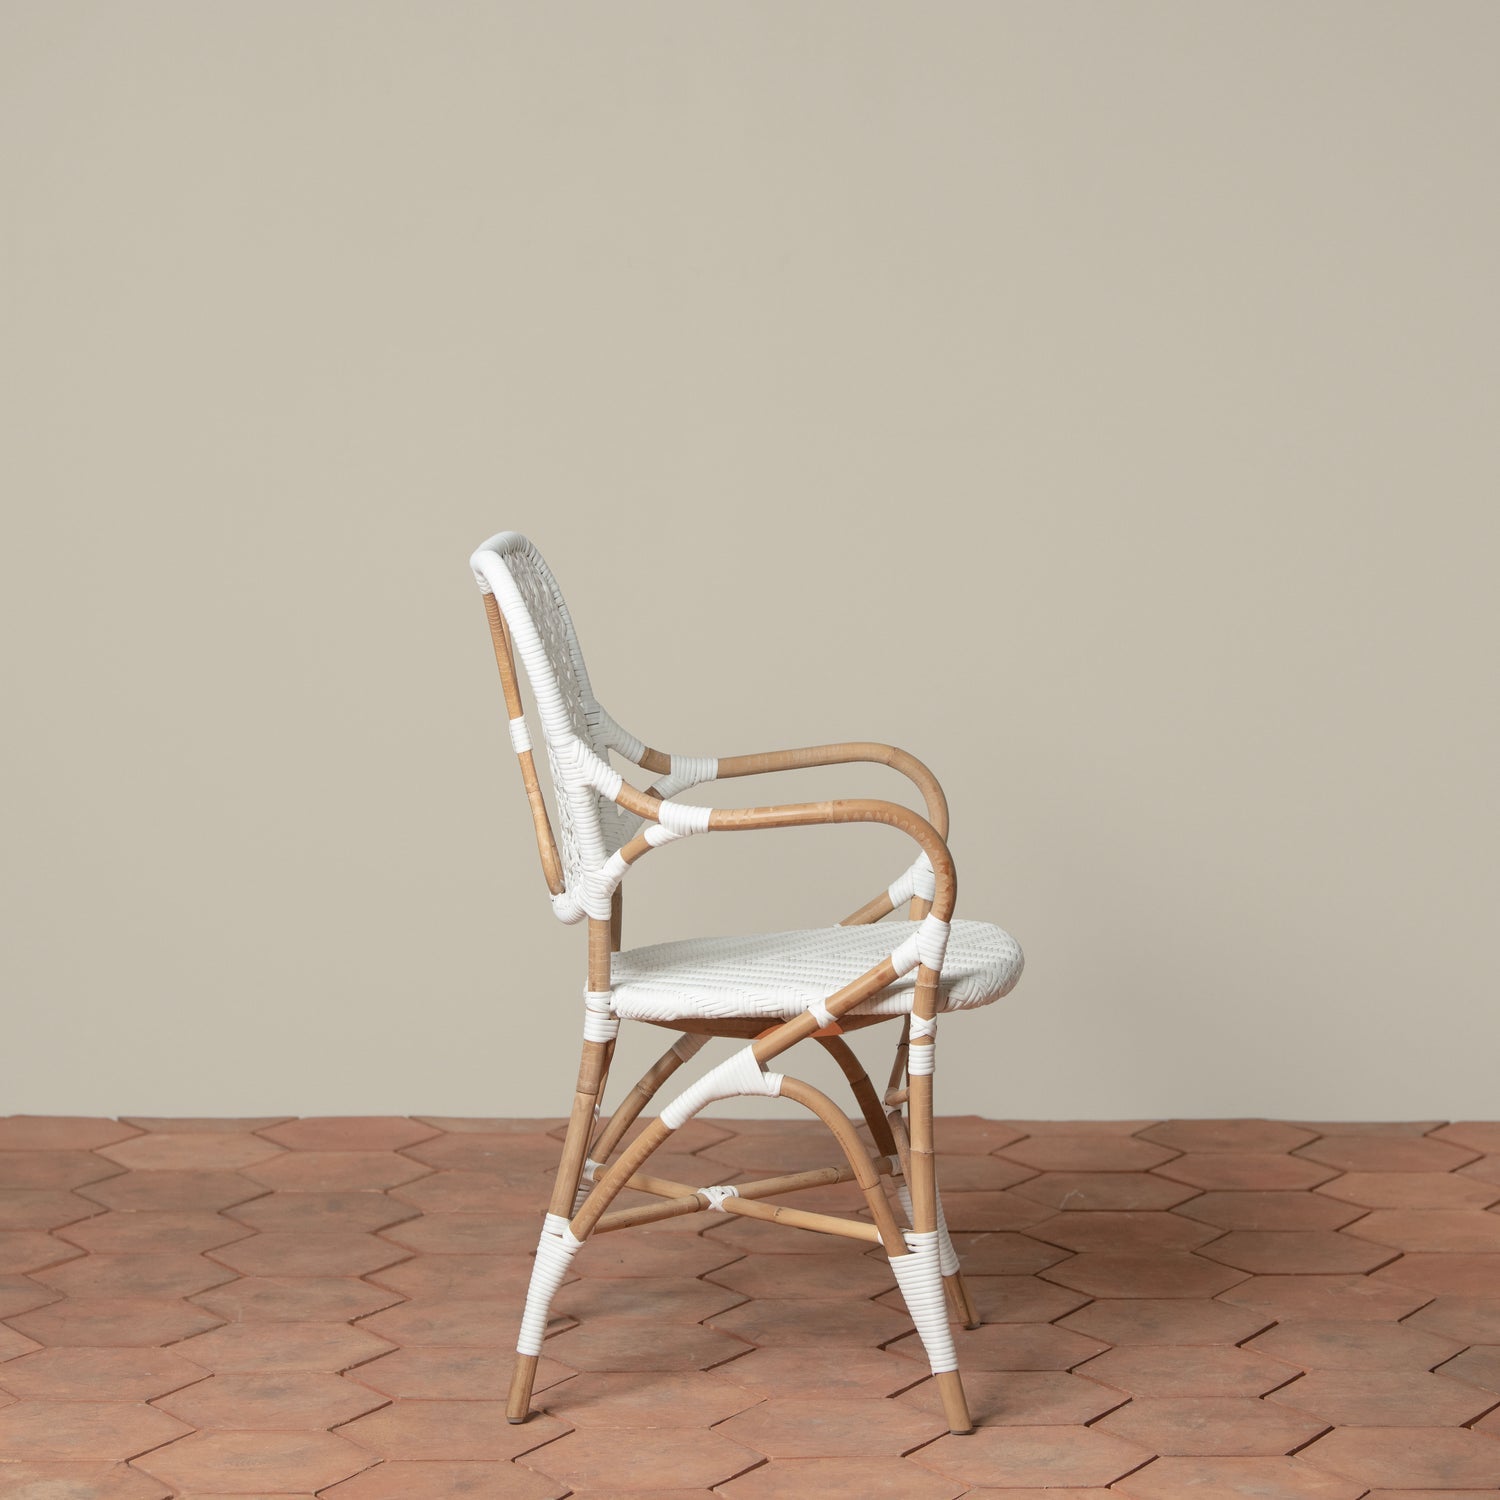 On a neutral background is a white and tan woven rattan chair with woven cane on the backrest and seat.